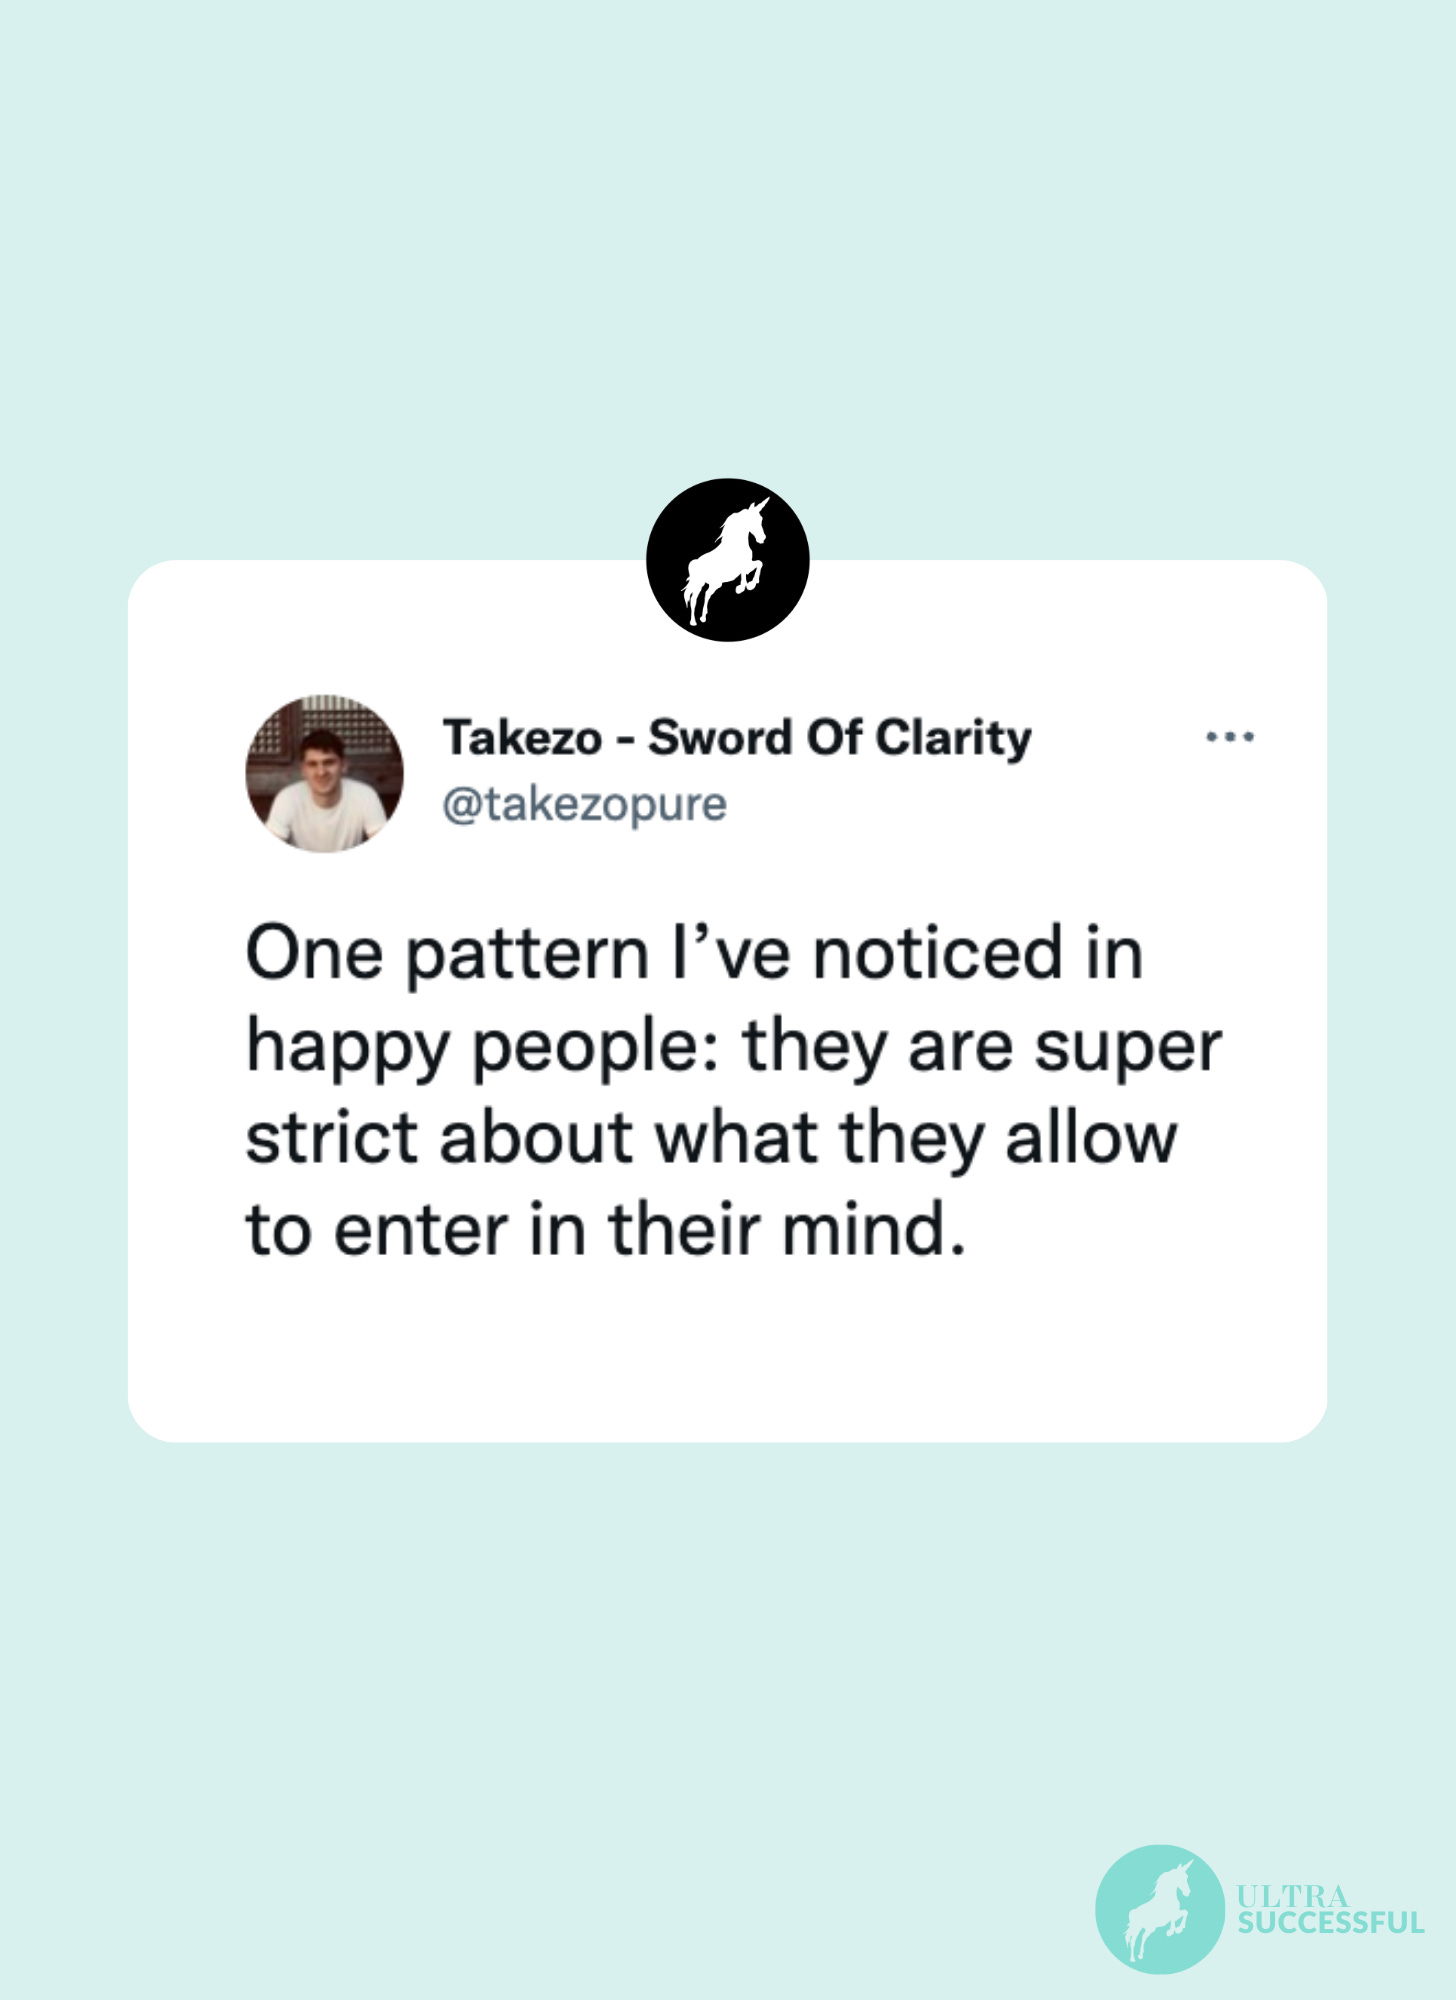 @takezopure: One pattern I’ve noticed in happy people: they are super strict about what they allow to enter in their mind.